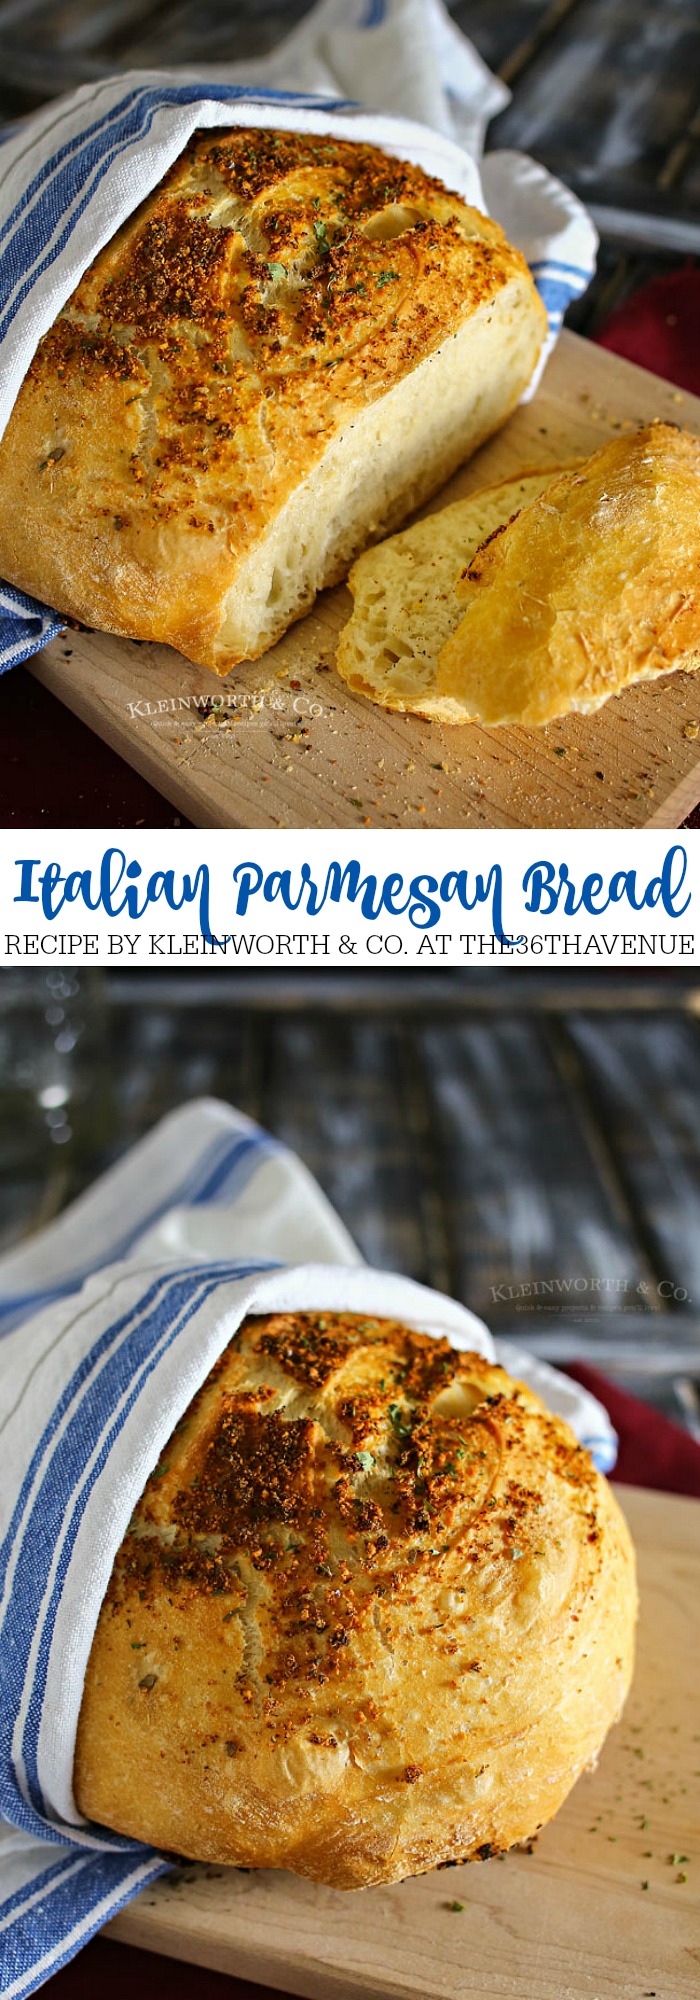 Crusty Italian Parmesan Bread is one of the easiest bread recipes around. Perfect with just about any dinner, one loaf never lasts long. It's delicious.